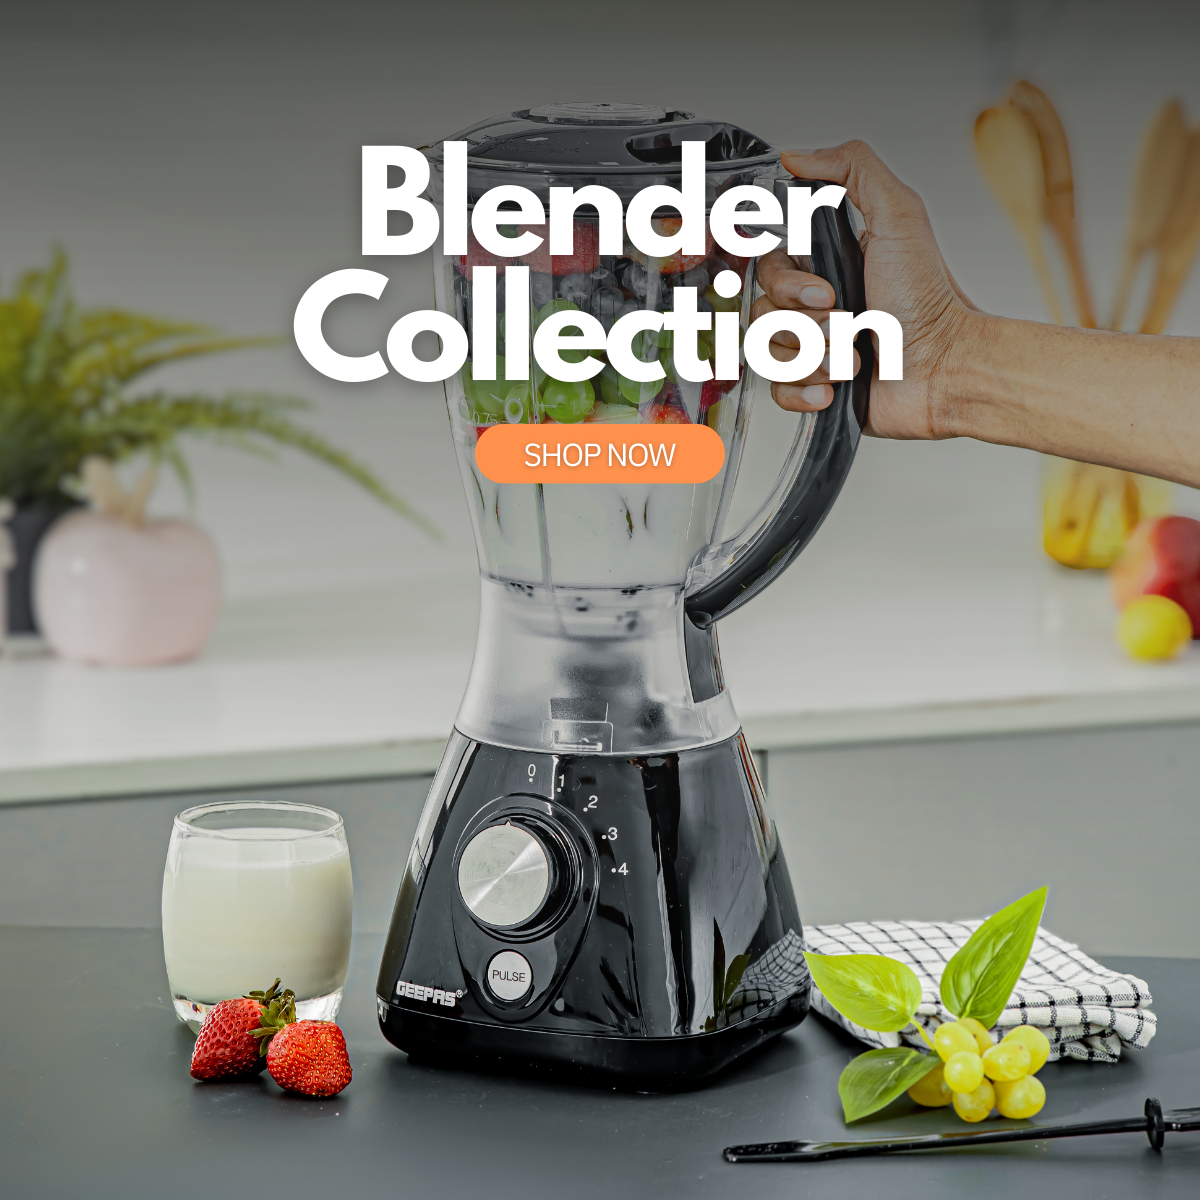 The image shows a kitchen countertop with the black basic blender on it with strawberries and grapes on the side.